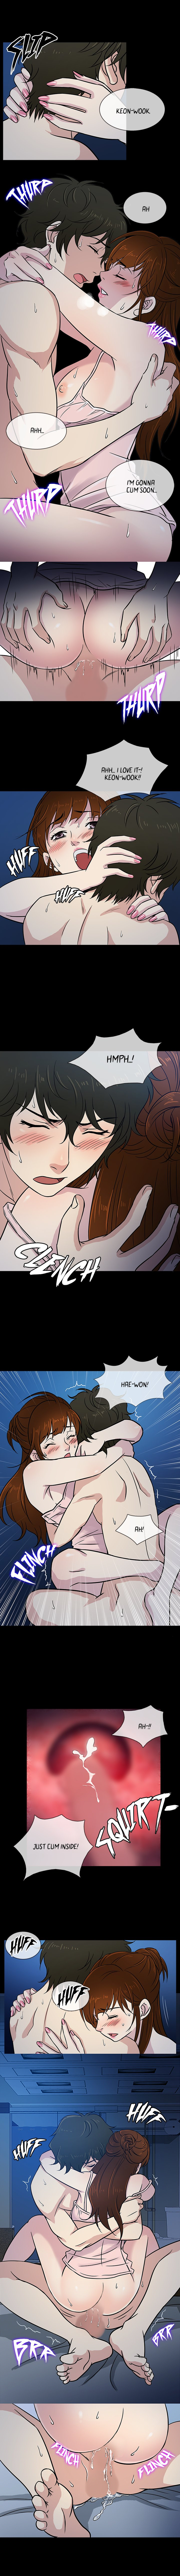 She’s Back - Chapter 7 Page 5